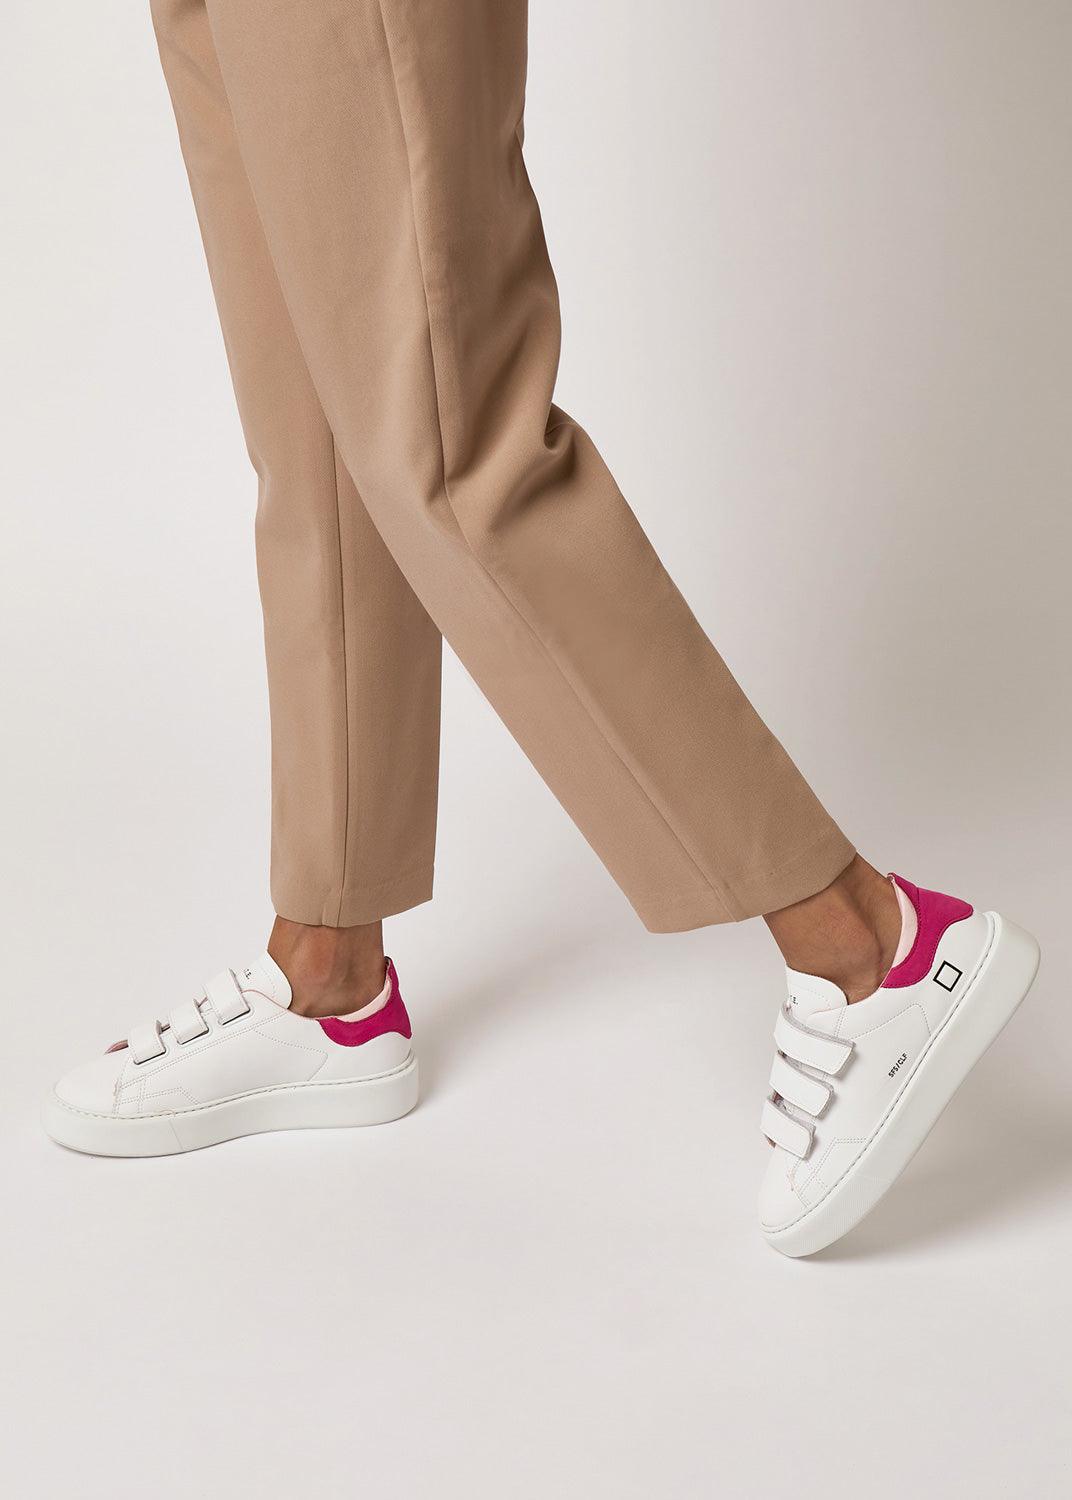 D.A.T.E Sfera Calf White and Pink Trainer - MADE THE EDIT